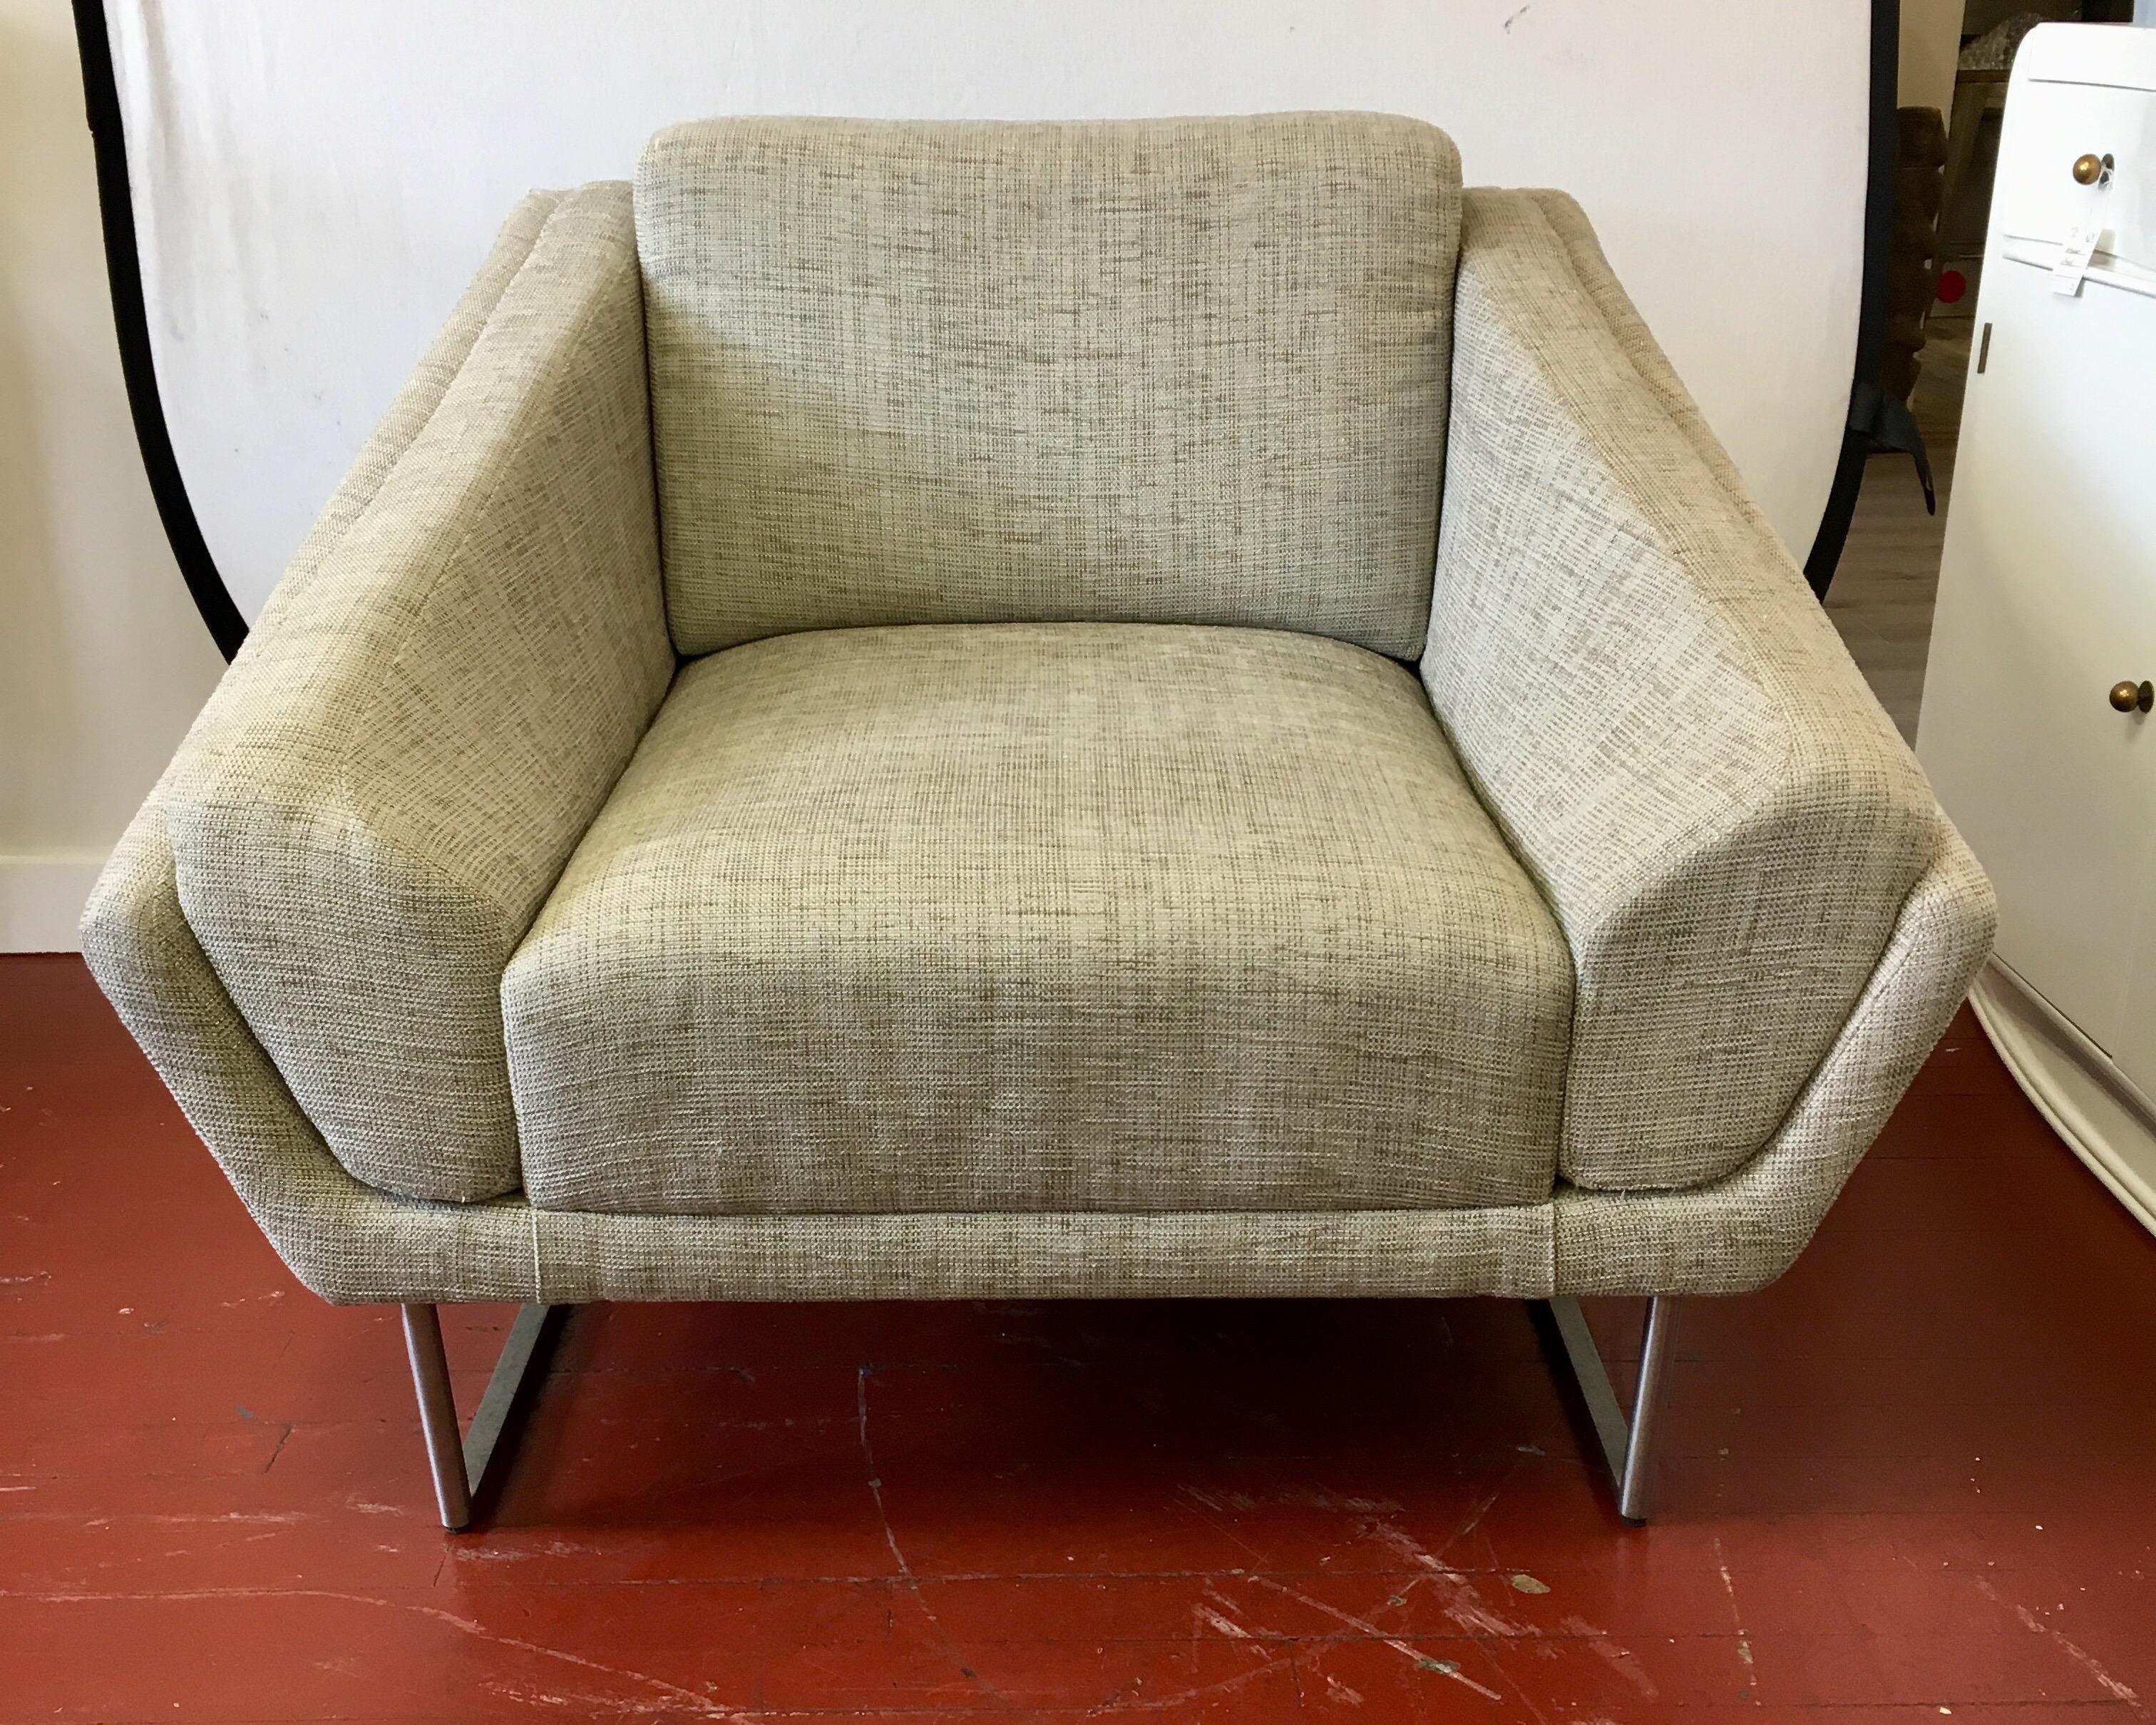 Mint condition, curved lounge chair by HBF Hickory, N.C.. The upholstery is a medium gray cotton weave and in perfect condition. The base or legs are a polished chrome. HBF is affiliated with Barbara Barry and they design and manufacture some of the